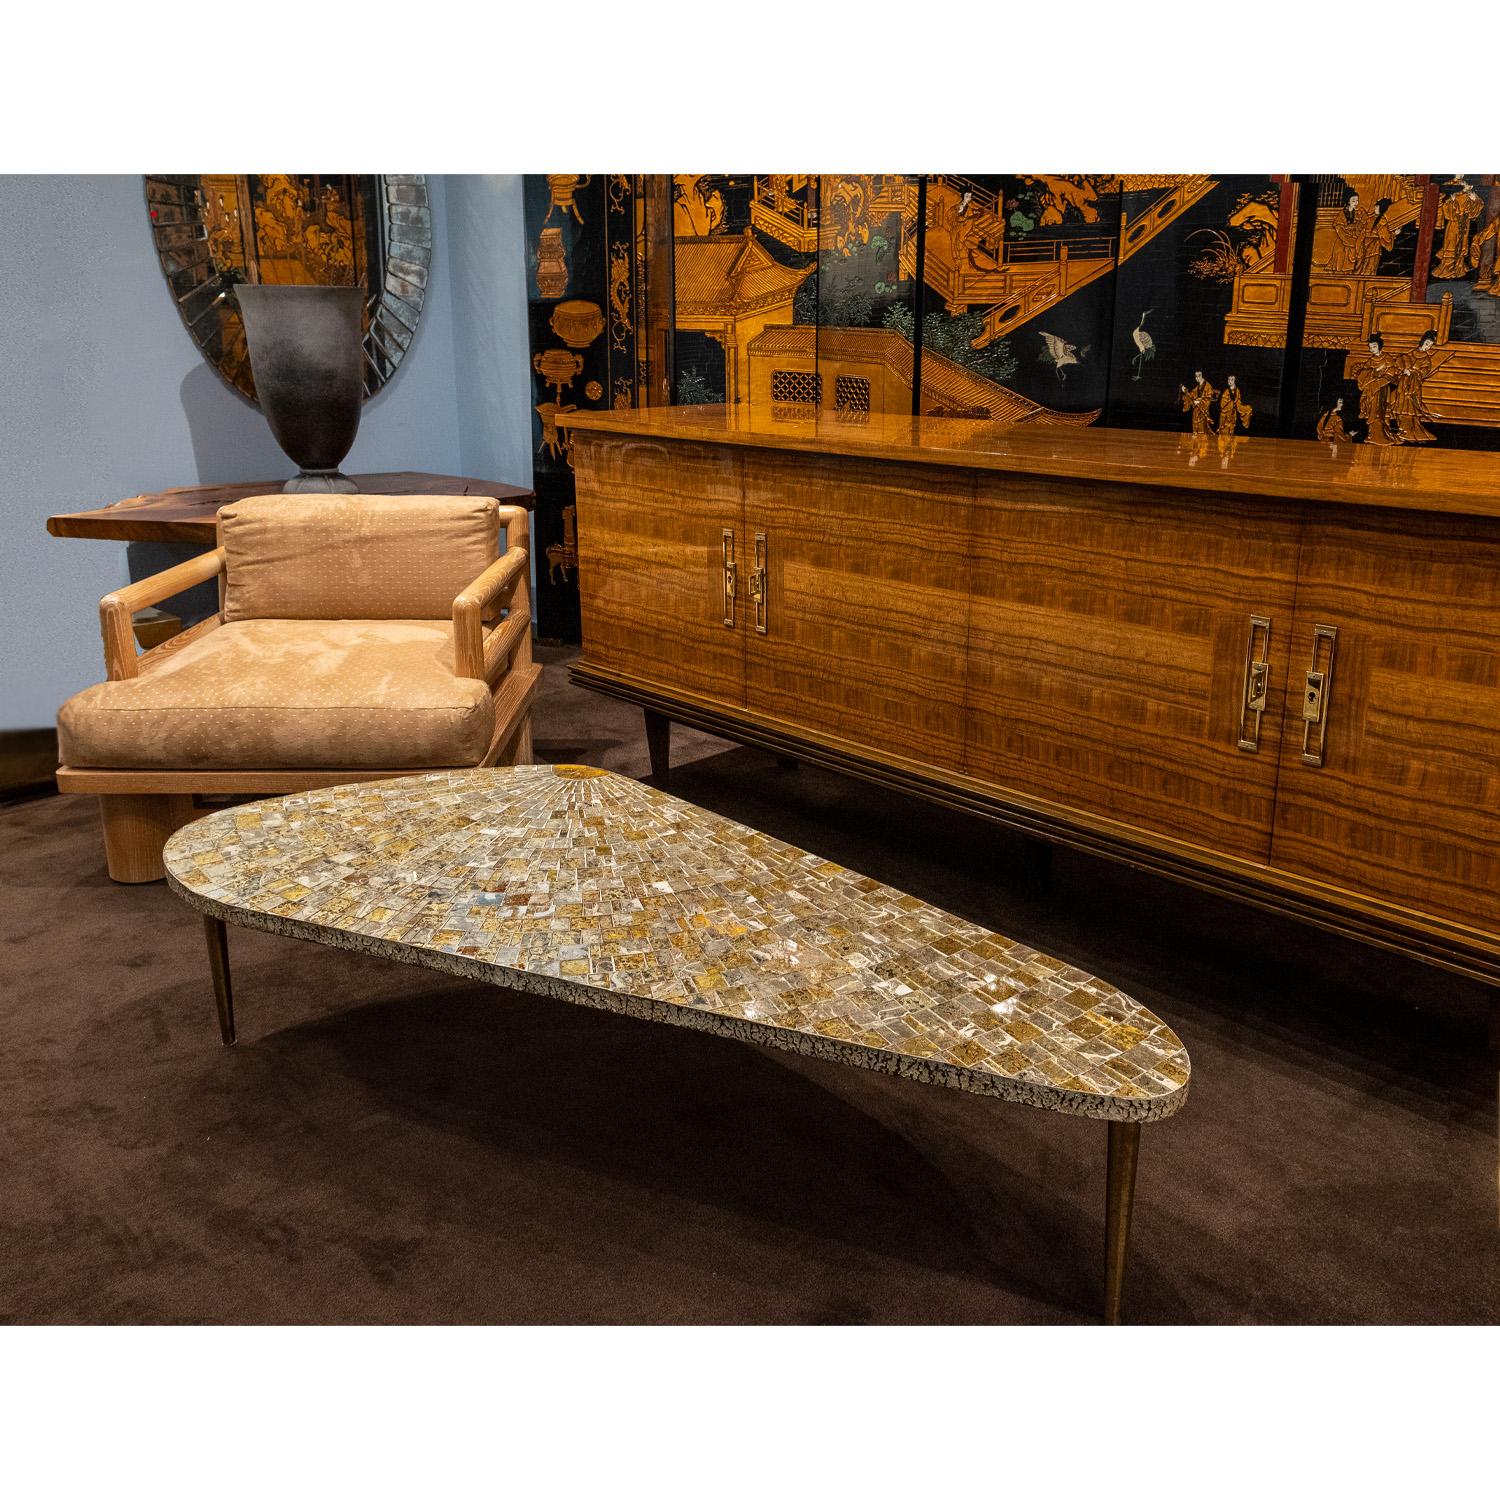 Mid-20th Century Chic Italian Artisan Coffee Table with Tessellated Glass Top 1950s